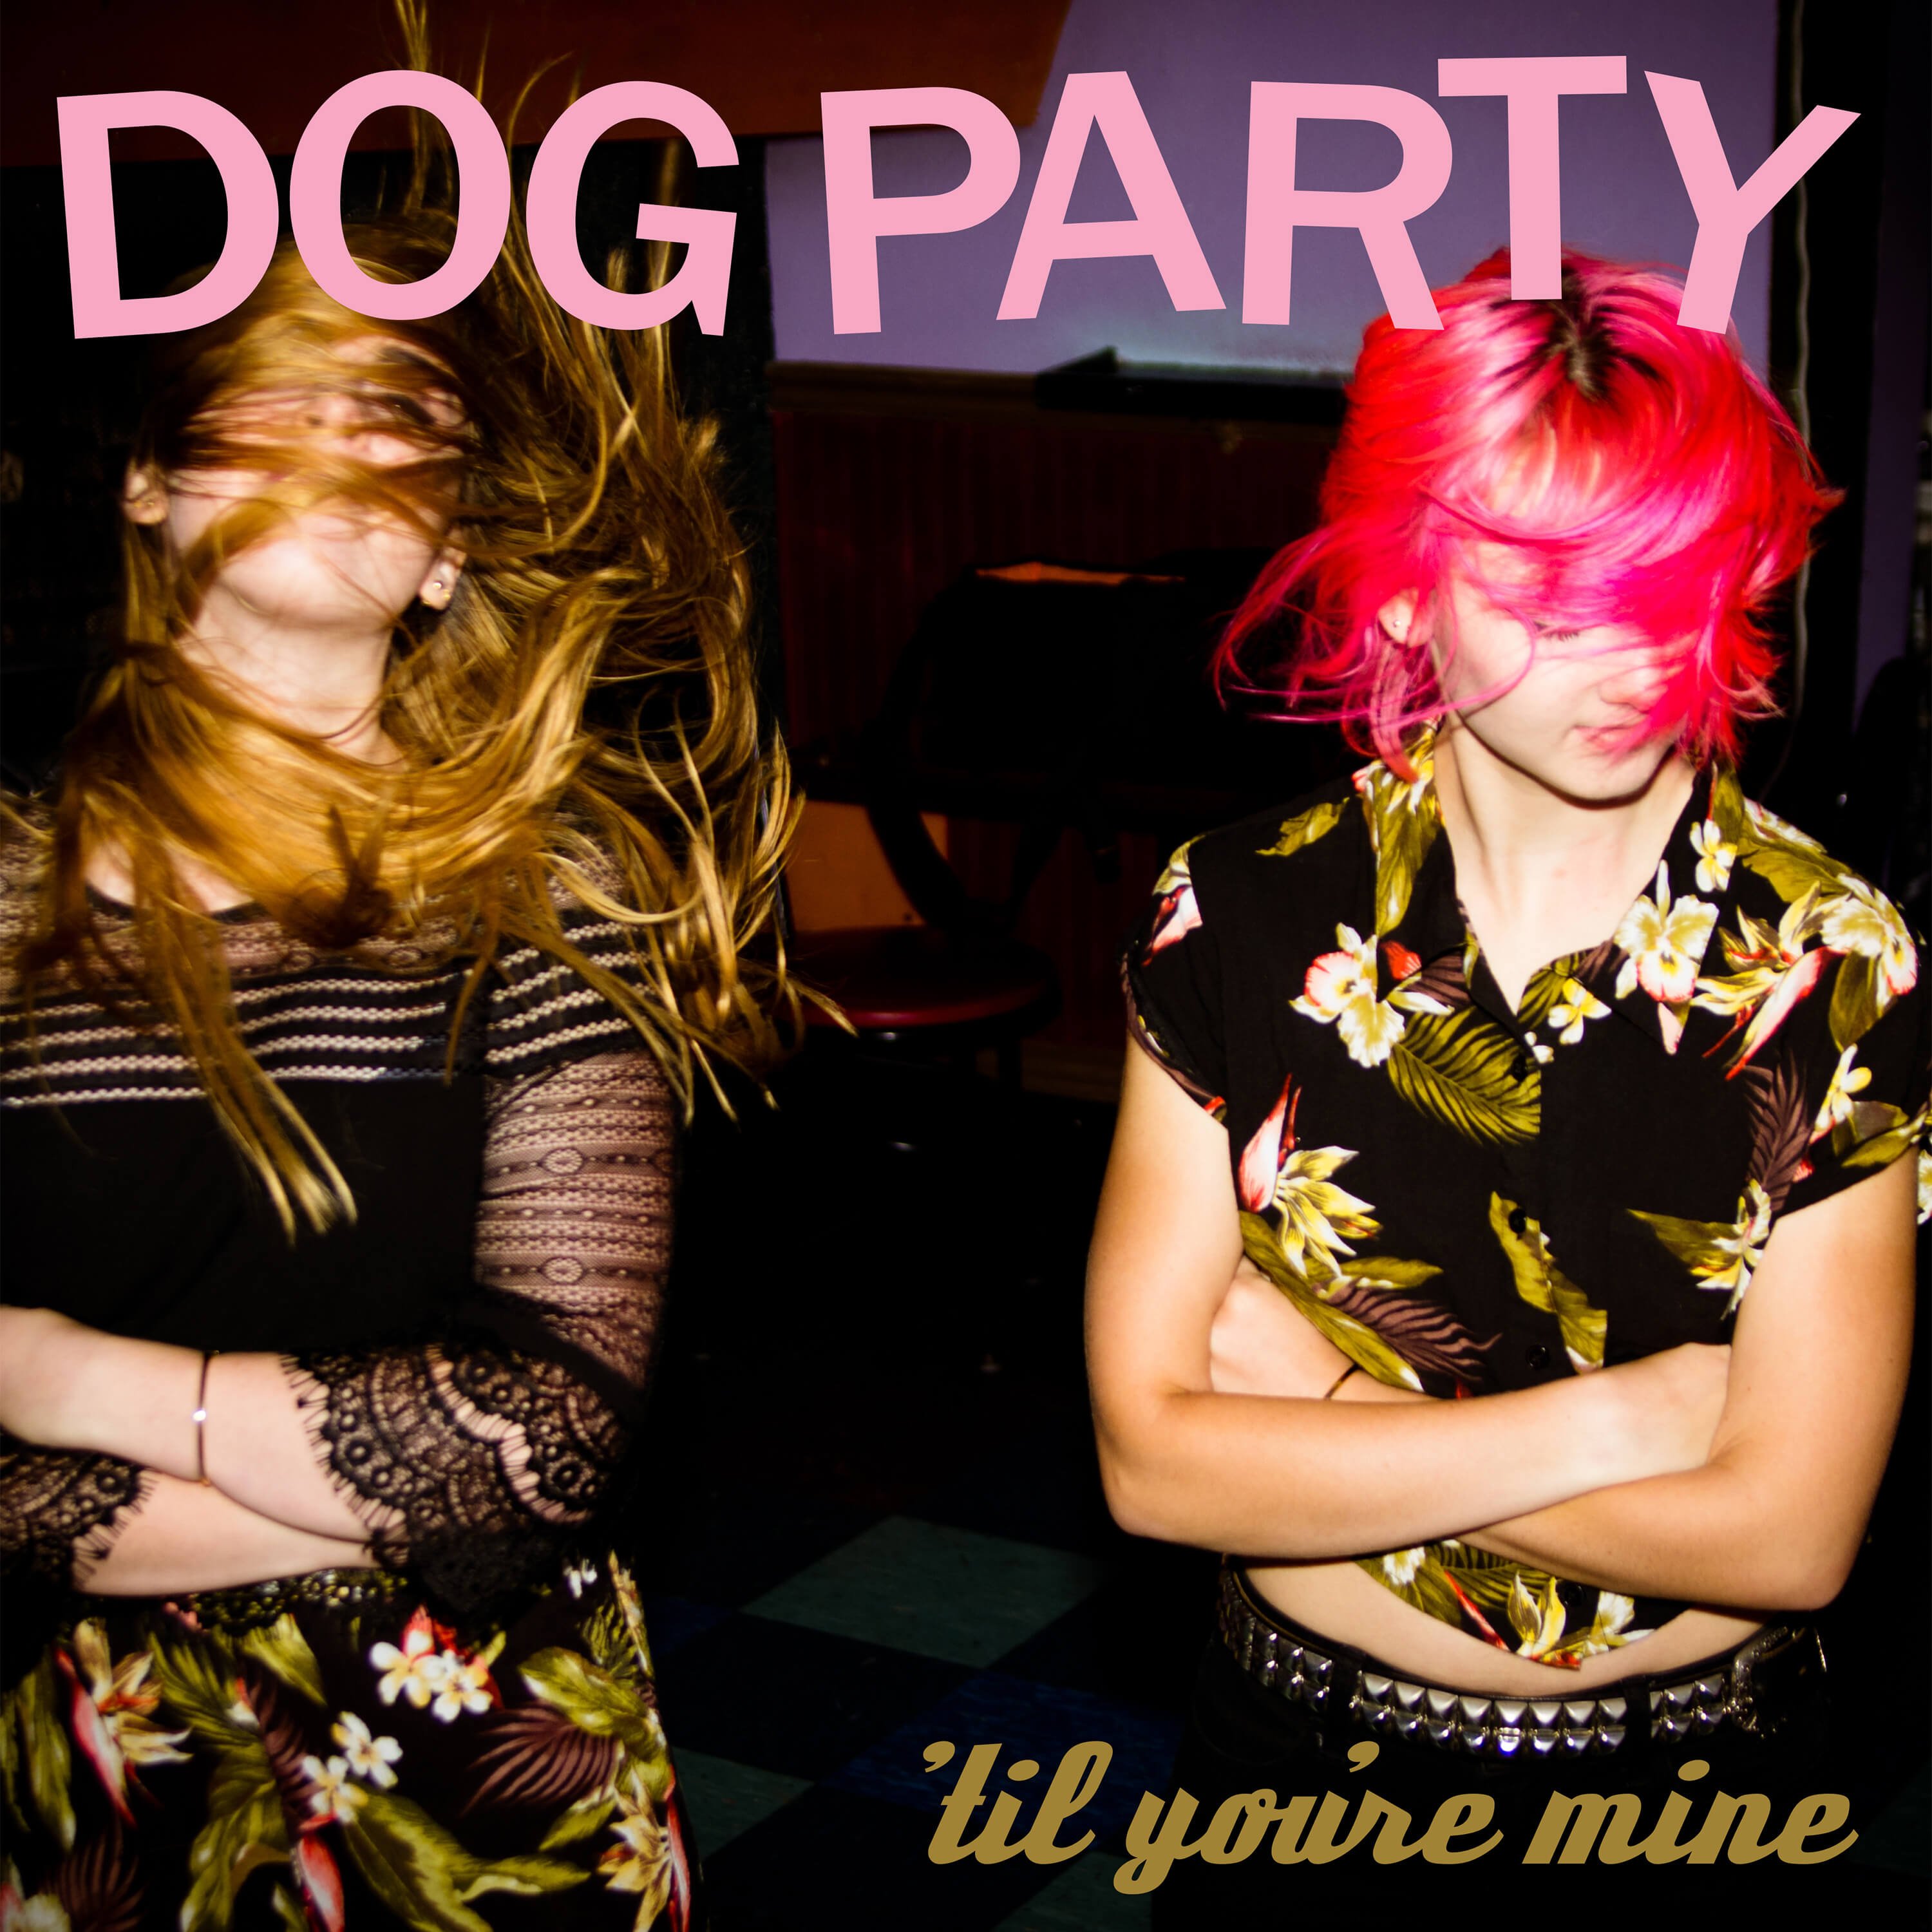 Dog Party – ‘Til You’re Mine Review and Album Stream